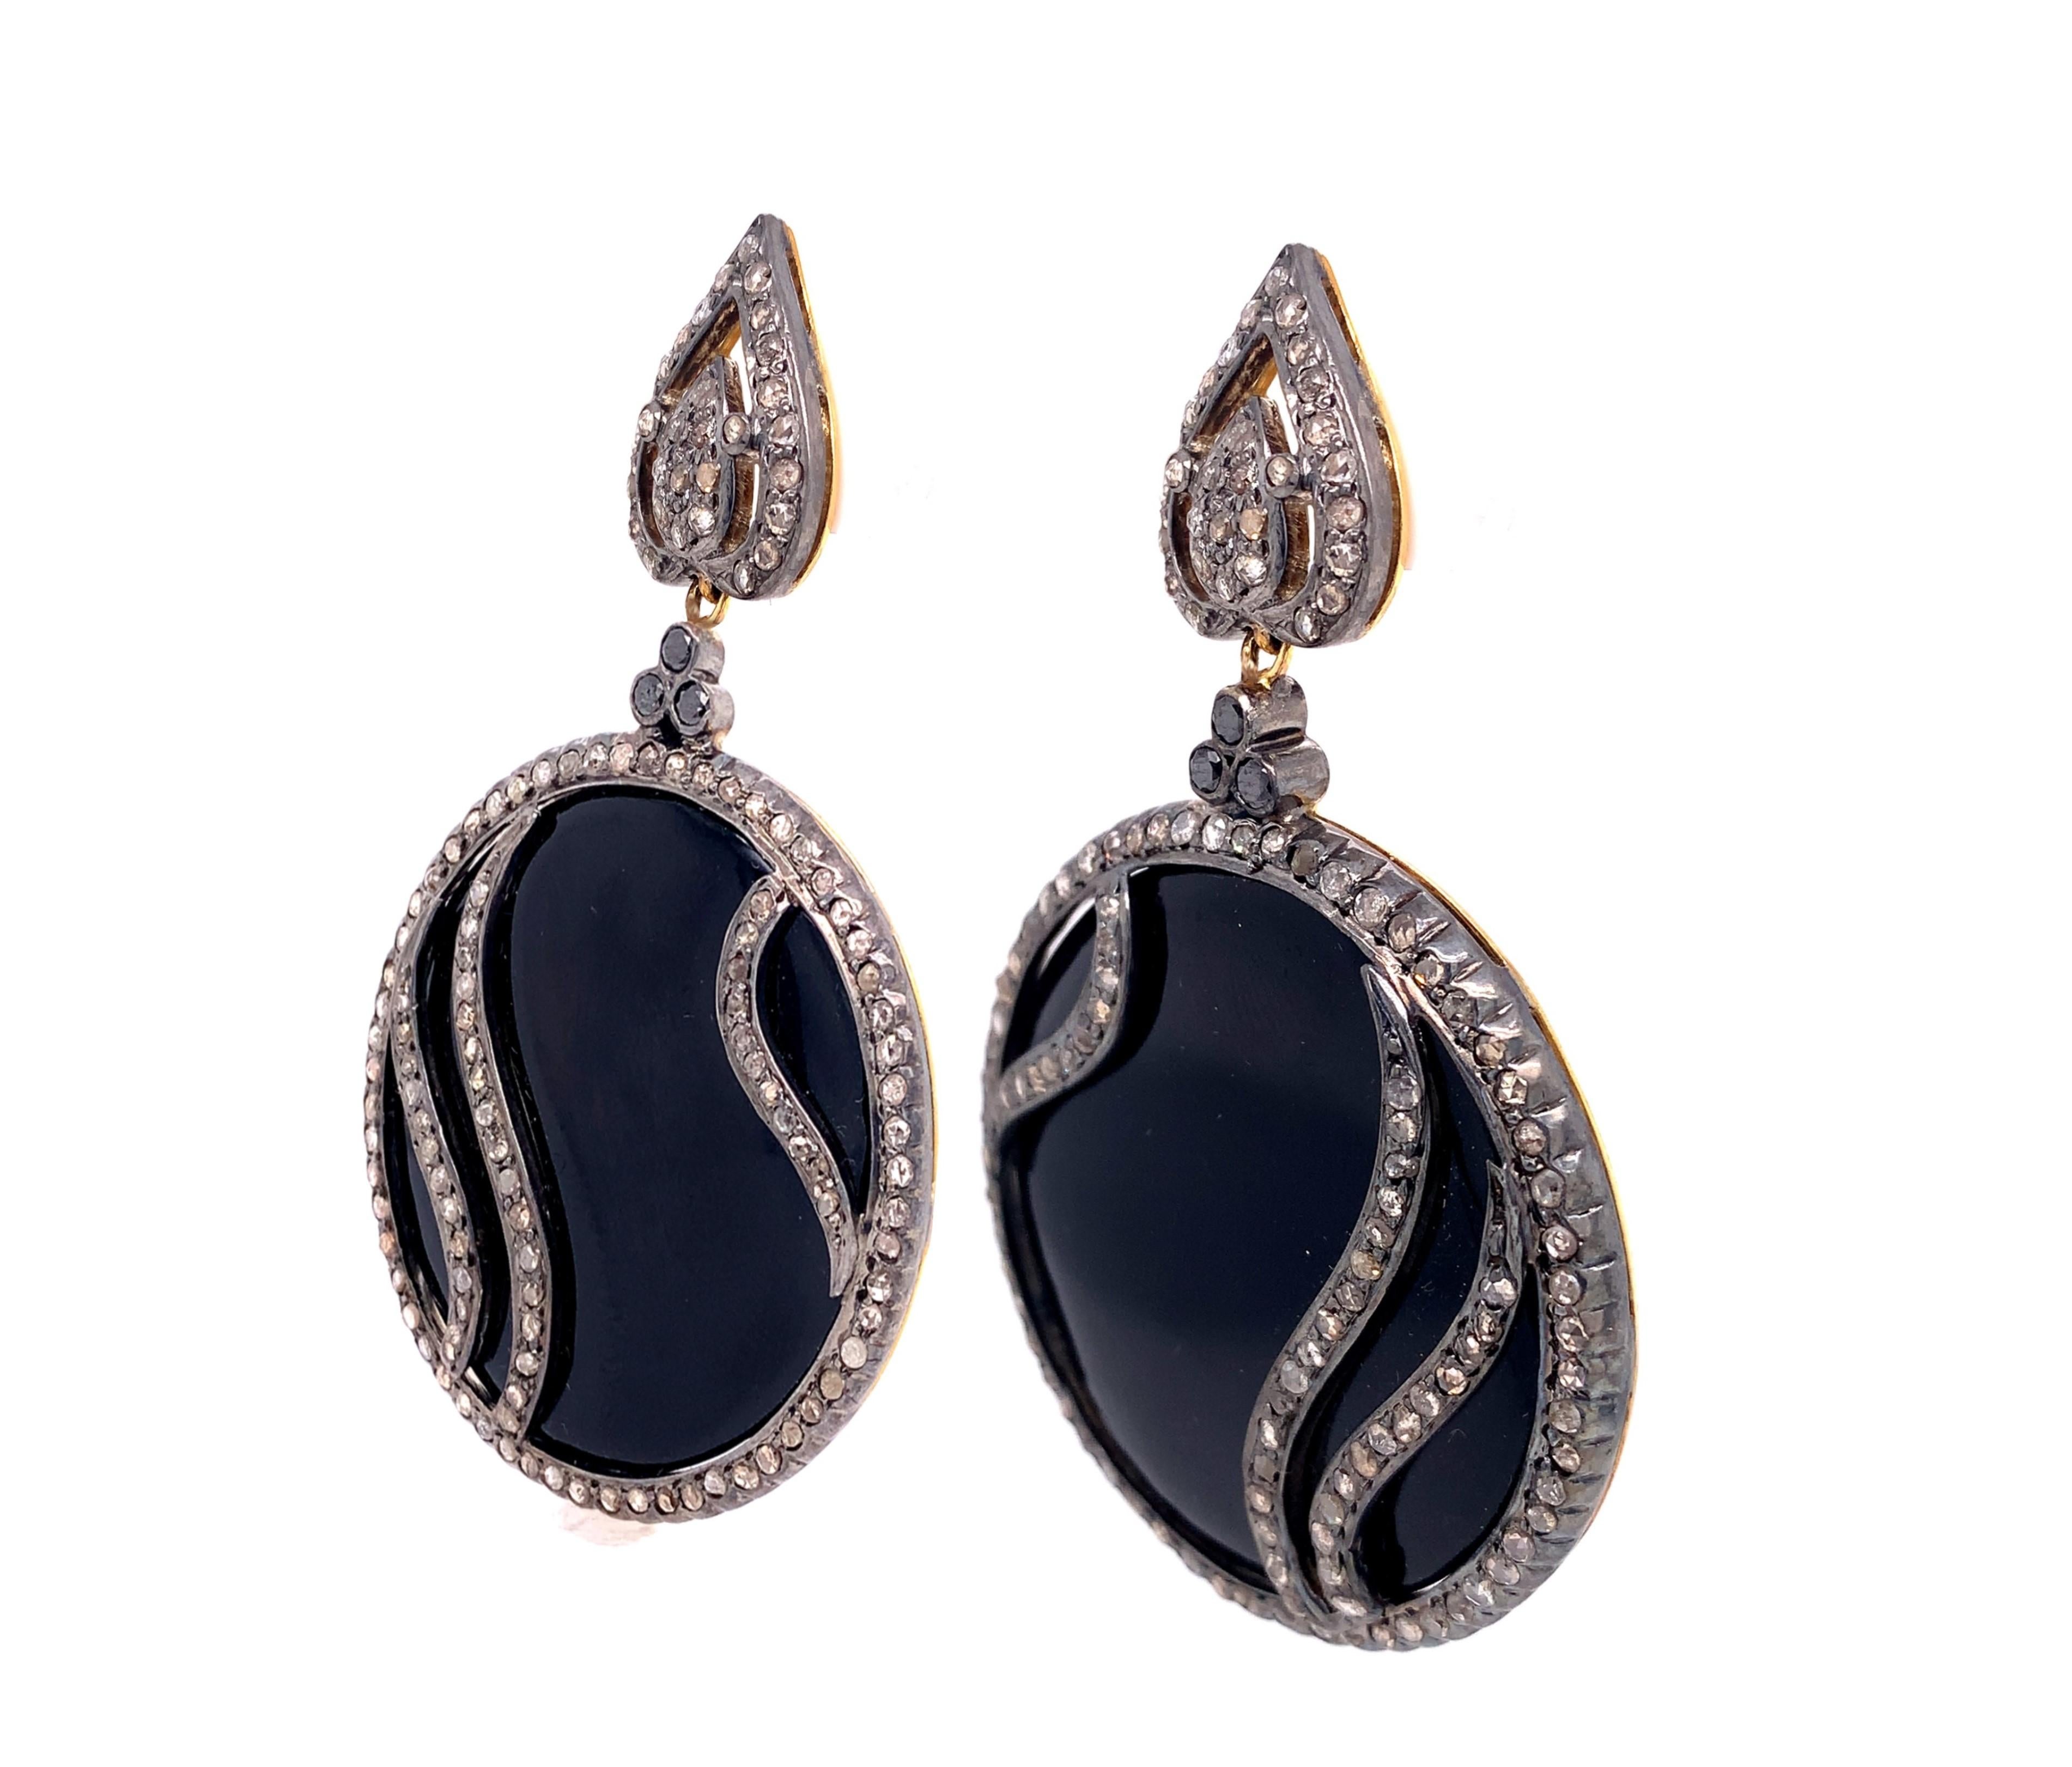 Life in color Collection

Perfect combination in these black Onyx and icy Diamond circle shaped earrings with wave motif set in Sterling silver and 14K gold.

Diamond: 4.19ct total weight.
Black Onyx: 62.82ct total weight.
